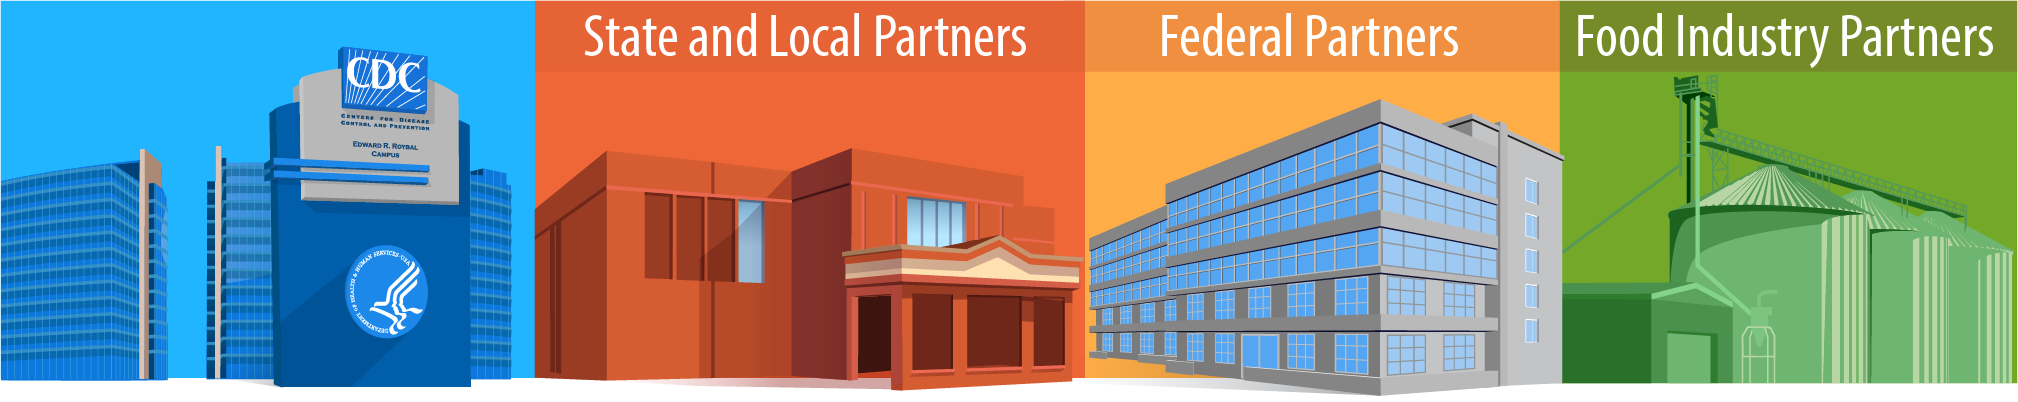 Image shows an illustration of CDC and its three partners: state and local partners, federal partners, and food industry partners.